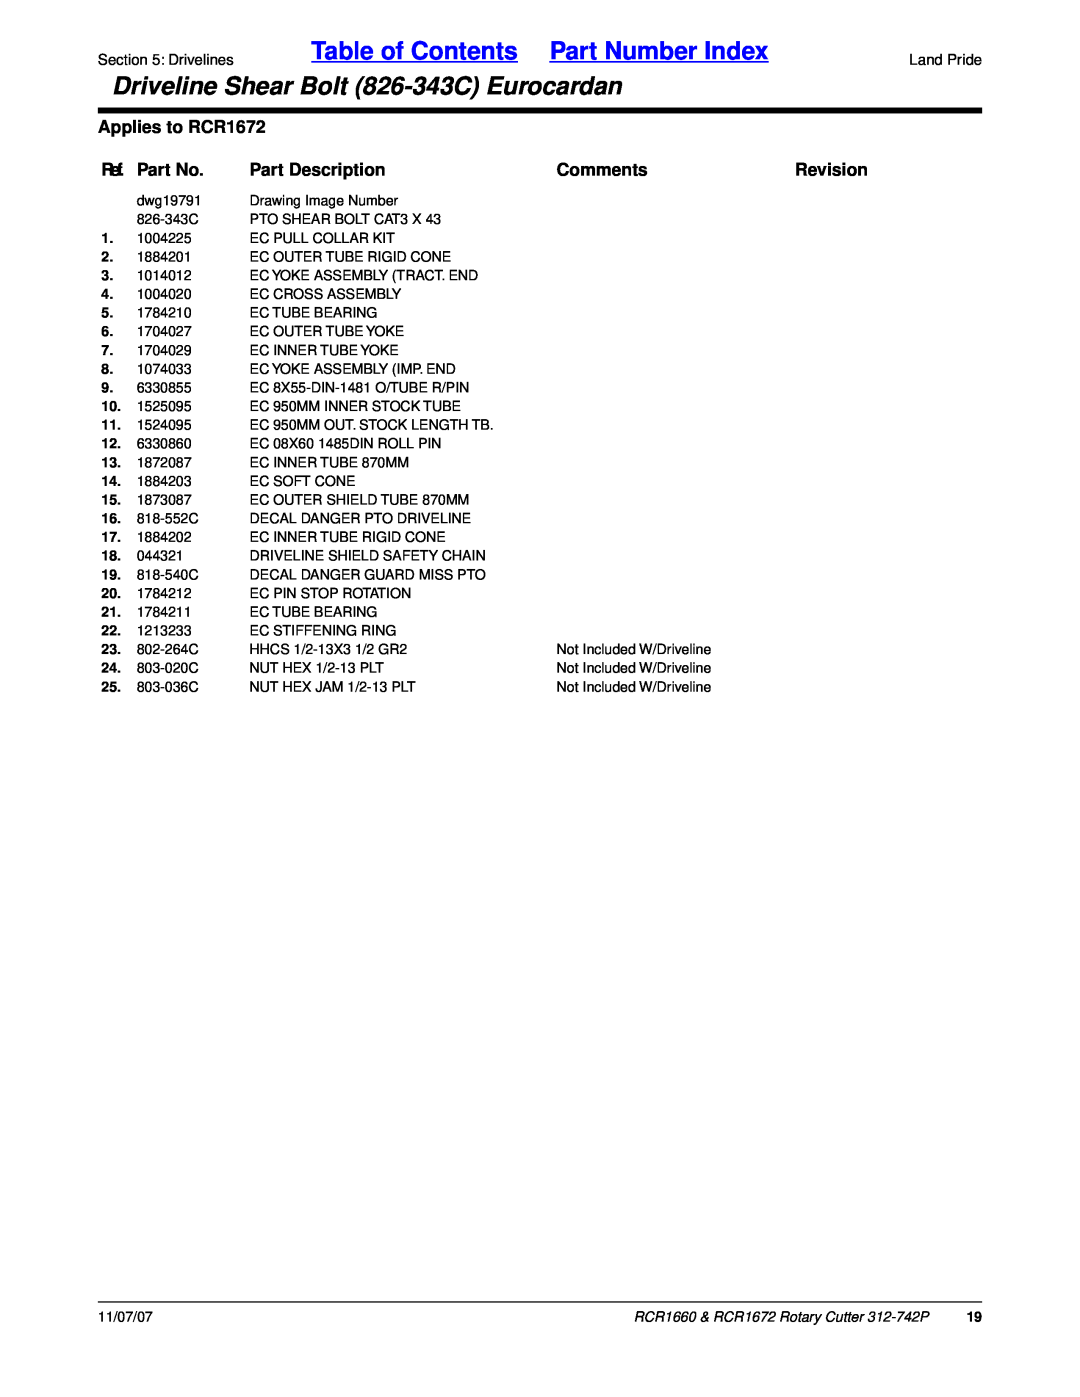 Land Pride RCR1660 manual Table of Contents Part Number Index, Driveline Shear Bolt 826-343CEurocardan, Applies to RCR1672 